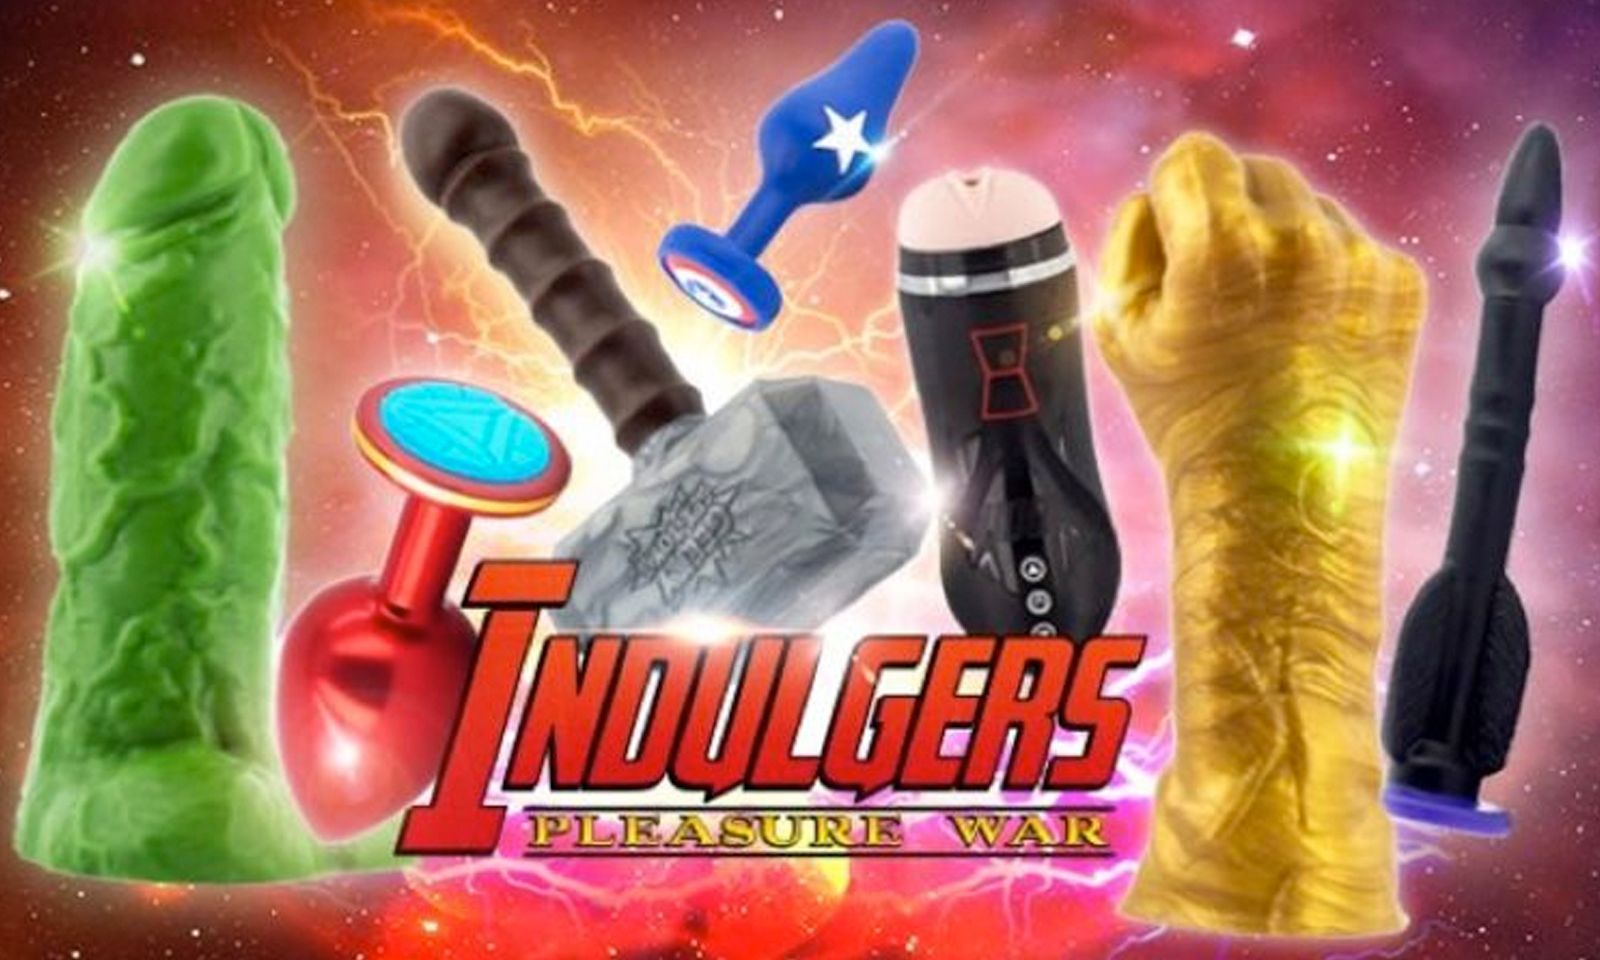 ‘Avengers’ Inspire New Toy Range At Geeky Sex Toys